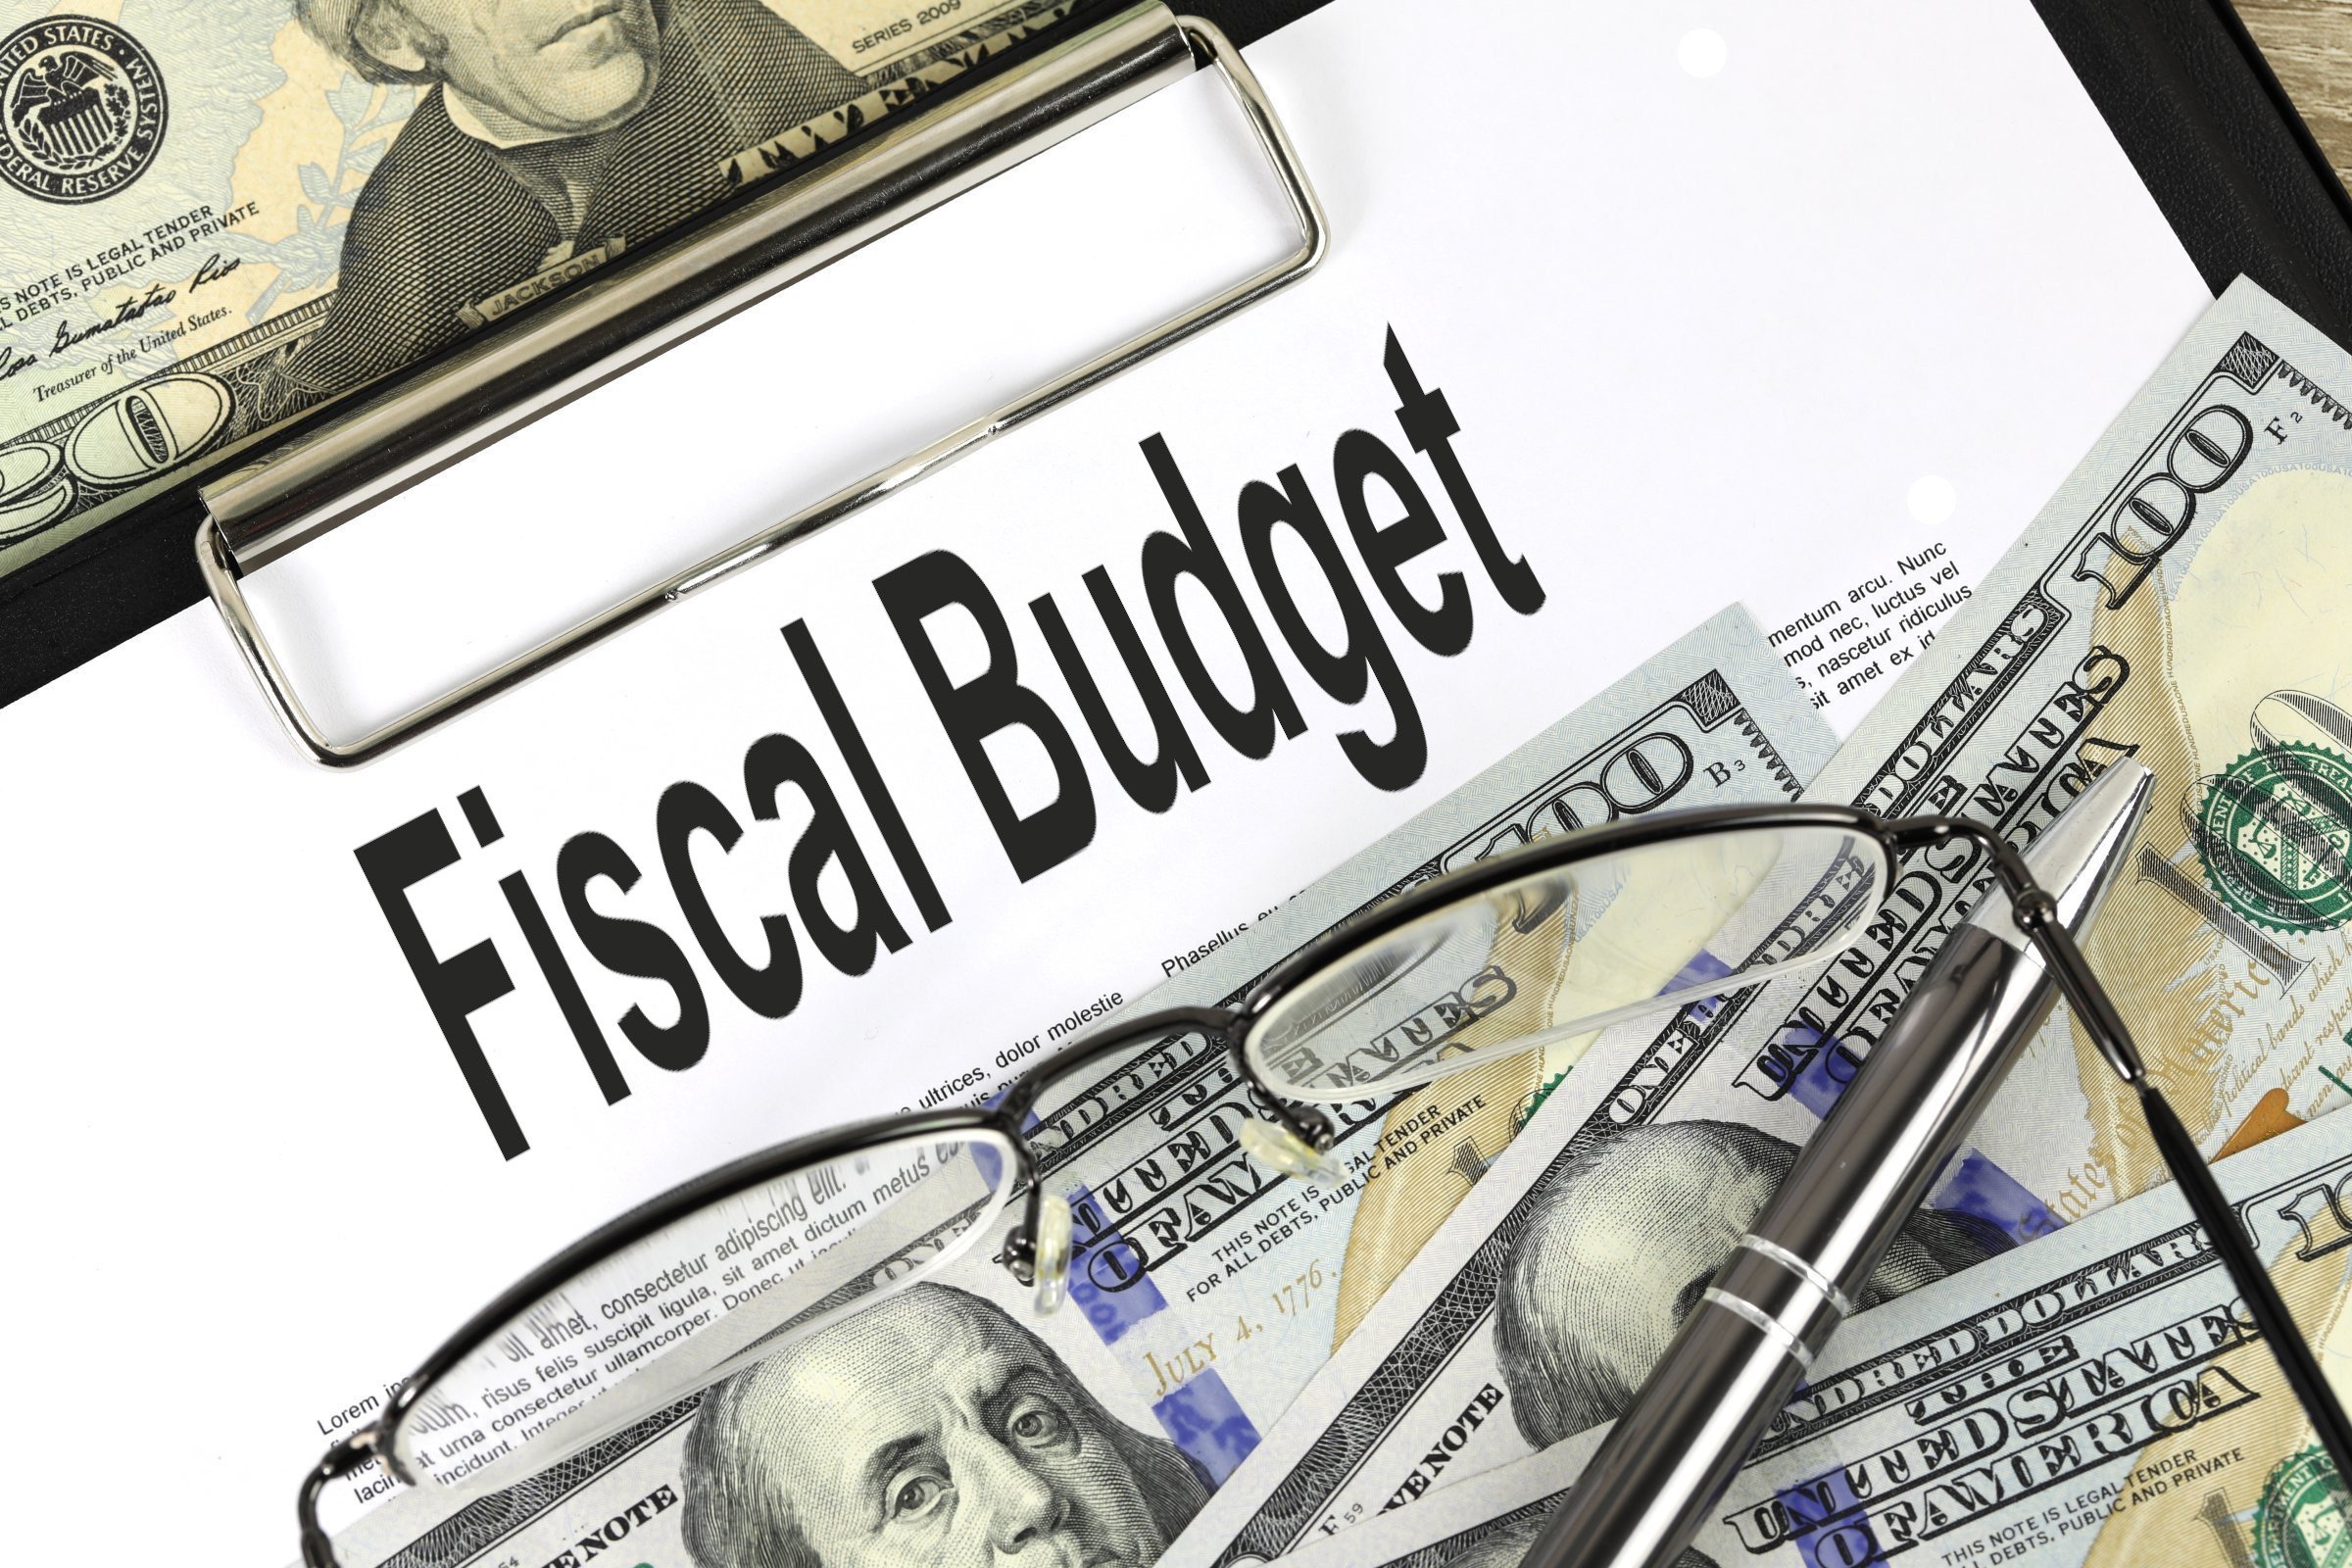 fiscal budget